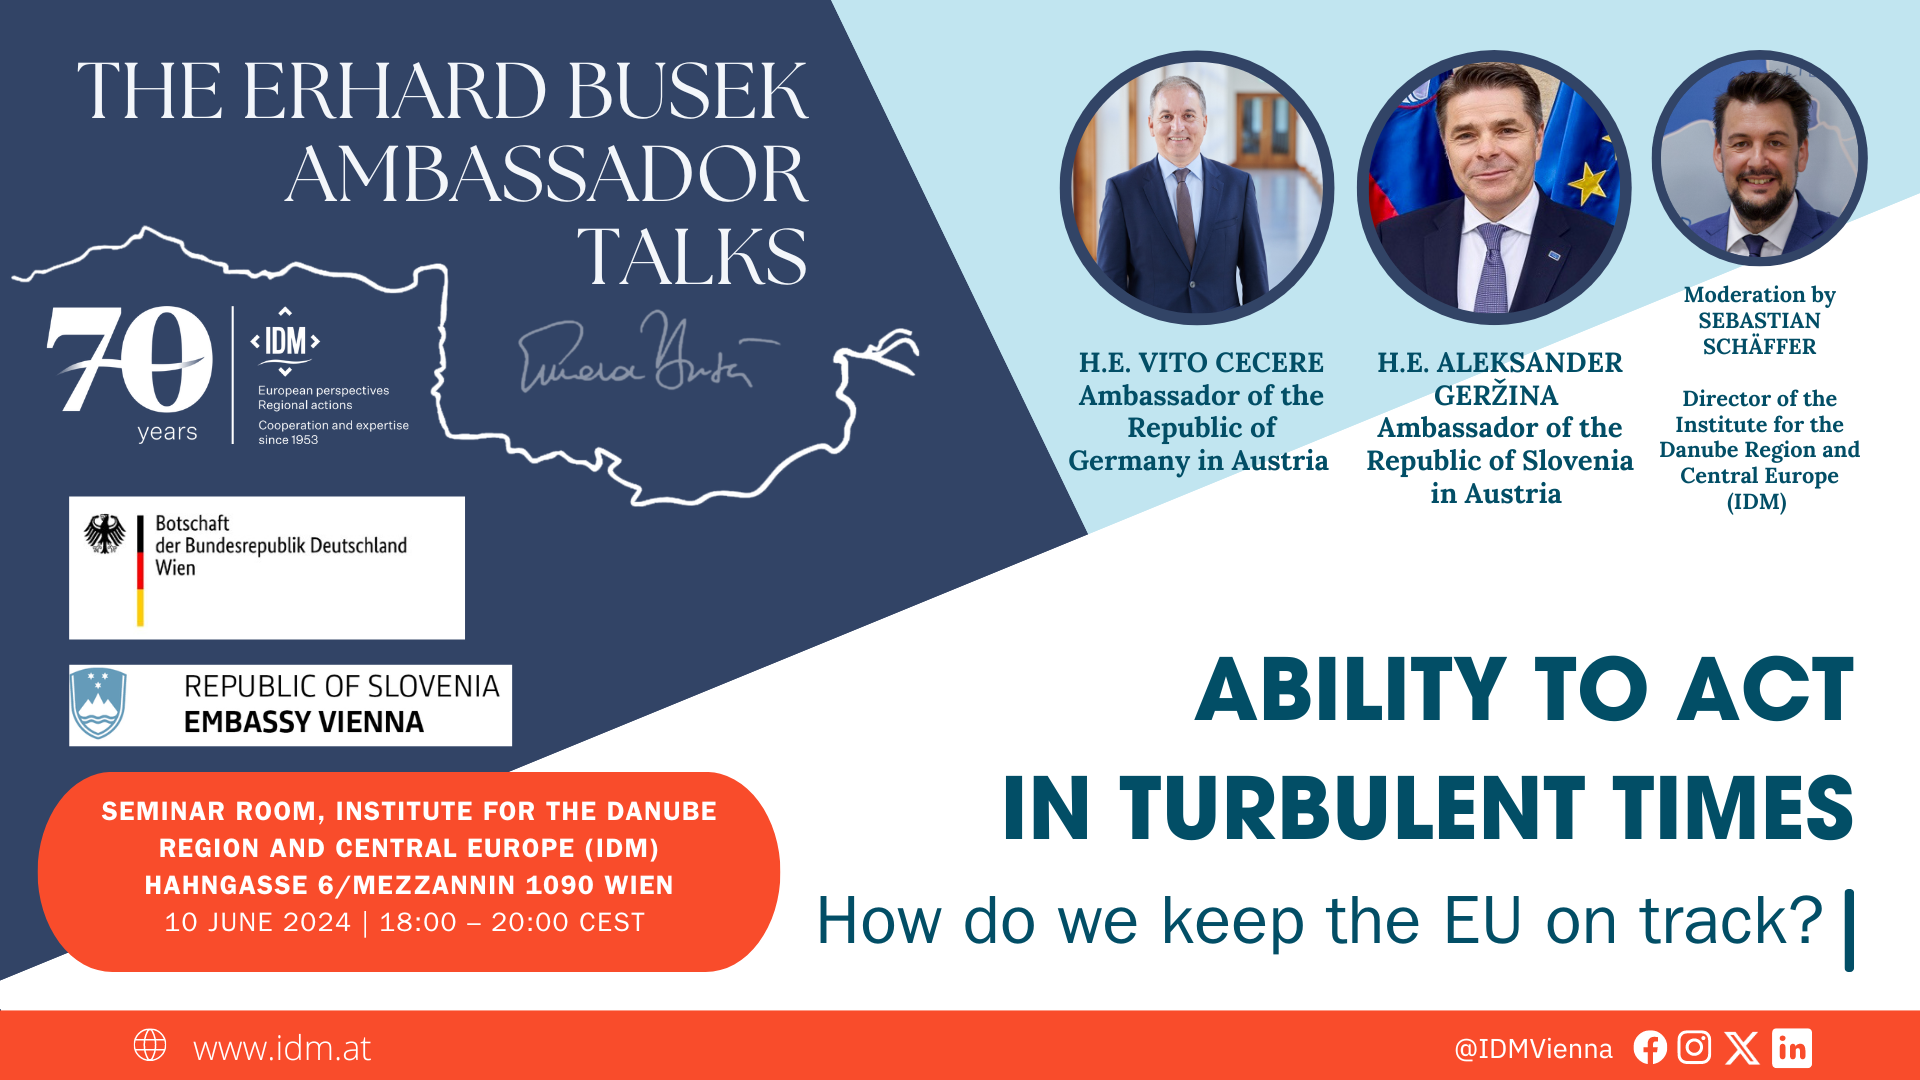 The Erhard Busek Ambassador Talks: Ability to act in turbulent times – how do we keep the EU on track?